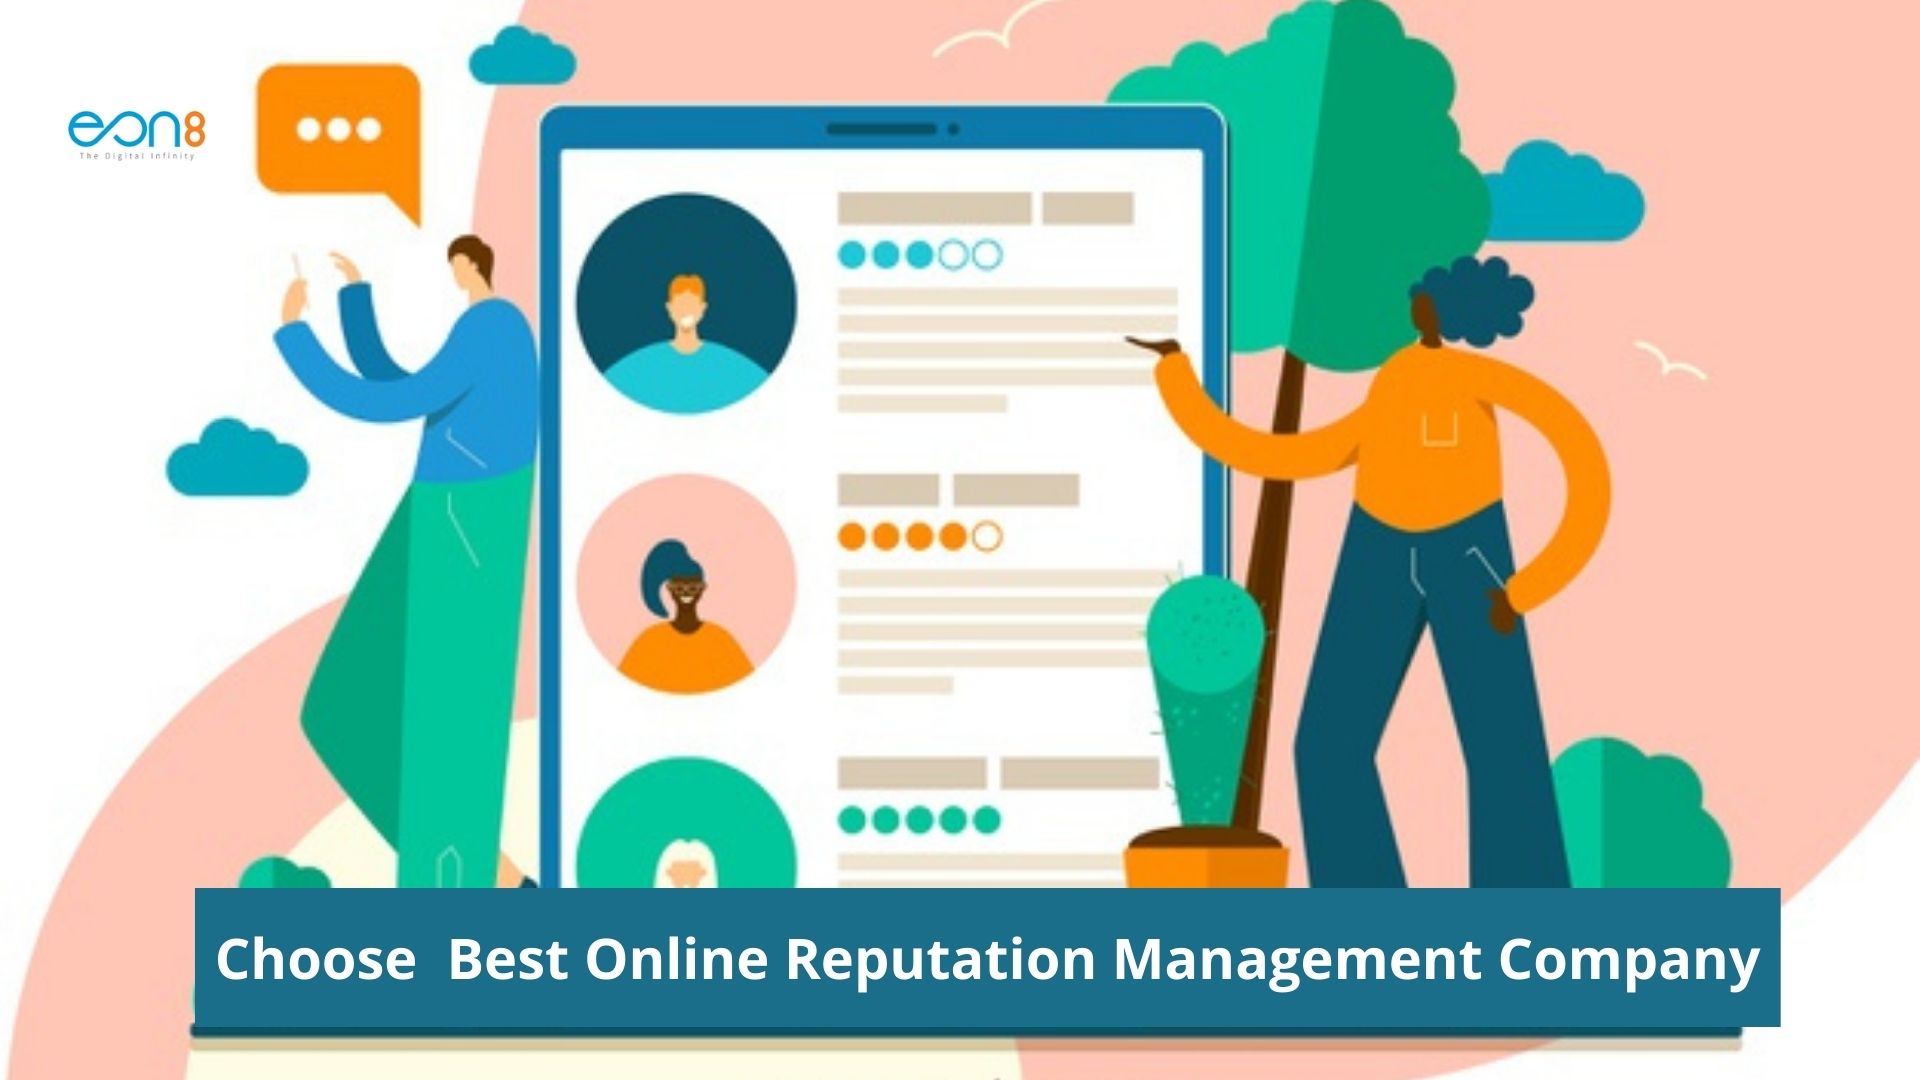 Tips to Choose the Best Online Reputation Management Company